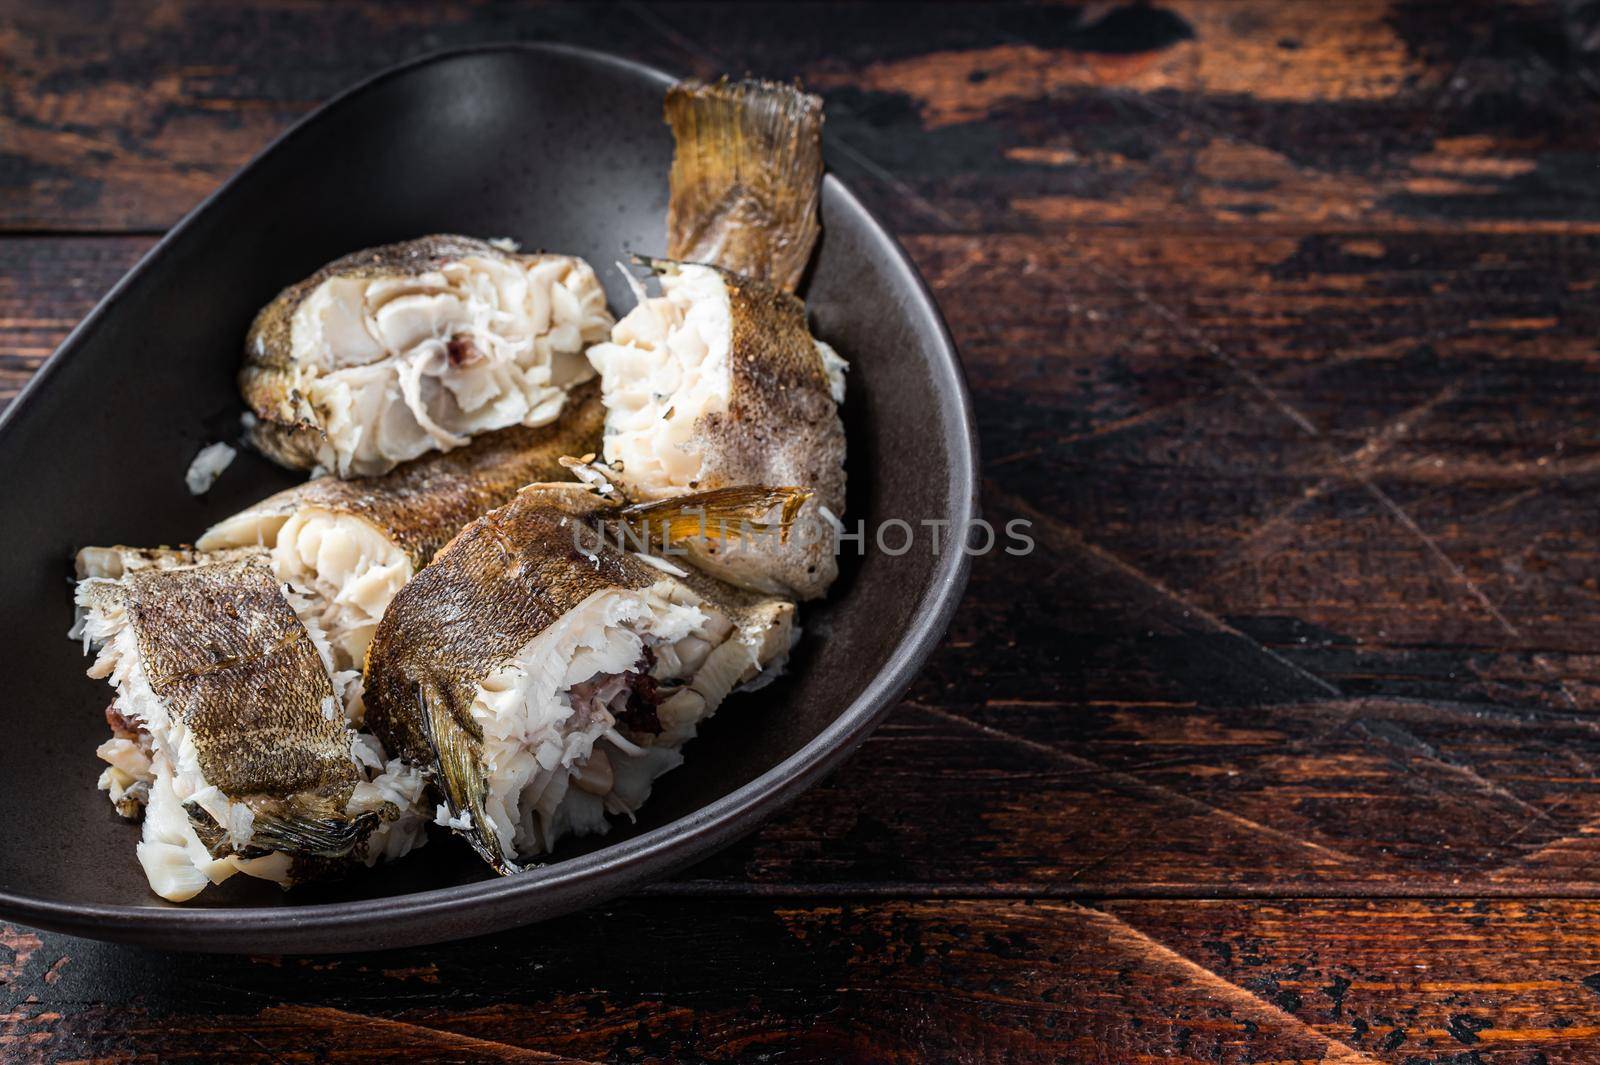 Roasted hake white fish in a plate. Dark wooden background. Top view. Copy space by Composter